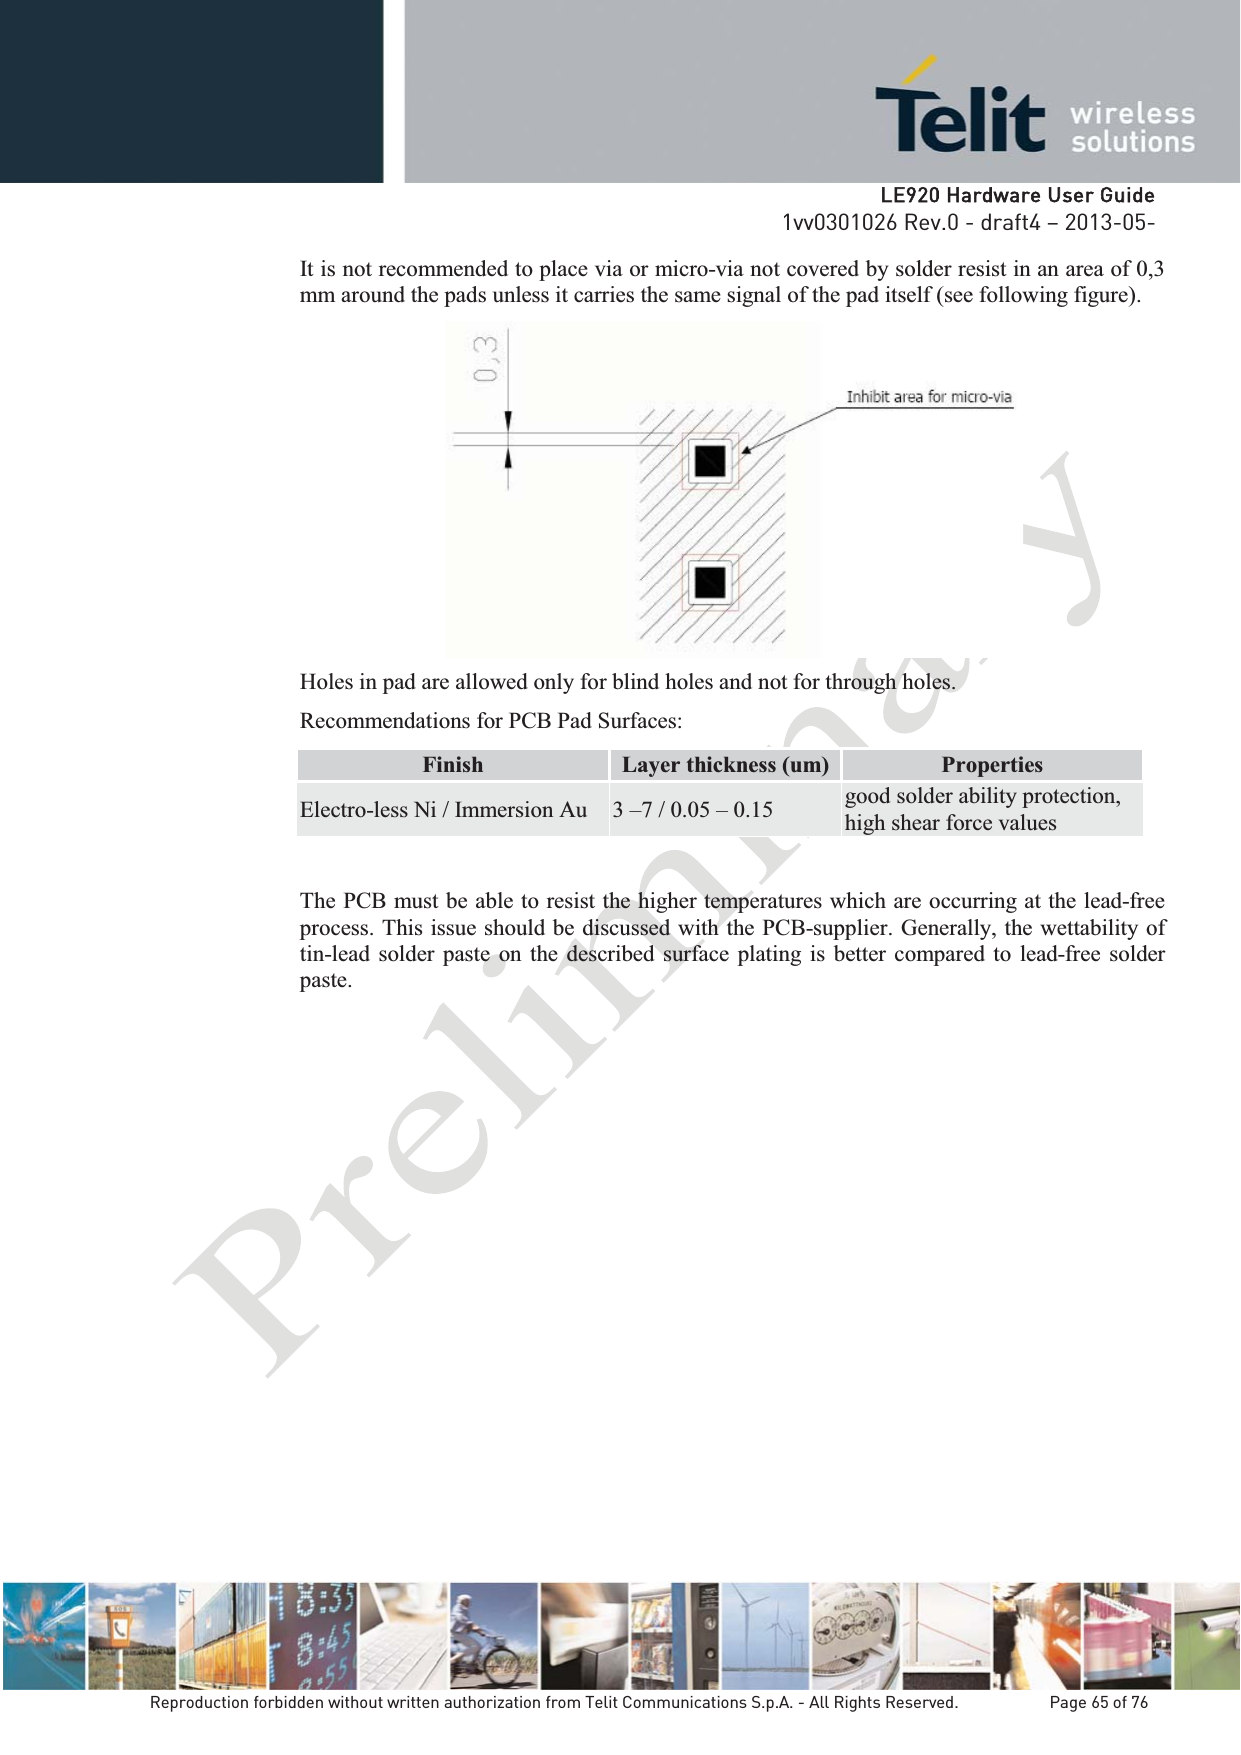   LLE920 Hardware User Guide1vv0301026 Rev.0 - draft4 – 2013-05-Reproduction forbidden without written authorization from Telit Communications S.p.A. - All Rights Reserved.    Page 65 of 76 It is not recommended to place via or micro-via not covered by solder resist in an area of 0,3 mm around the pads unless it carries the same signal of the pad itself (see following figure).  Holes in pad are allowed only for blind holes and not for through holes. Recommendations for PCB Pad Surfaces: Finish  Layer thickness (um)  Properties Electro-less Ni / Immersion Au  3 –7 / 0.05 – 0.15  good solder ability protection, high shear force values The PCB must be able to resist the higher temperatures which are occurring at the lead-free process. This issue should be discussed with the PCB-supplier. Generally, the wettability of tin-lead solder paste on the described surface plating is better compared to lead-free solder paste.           